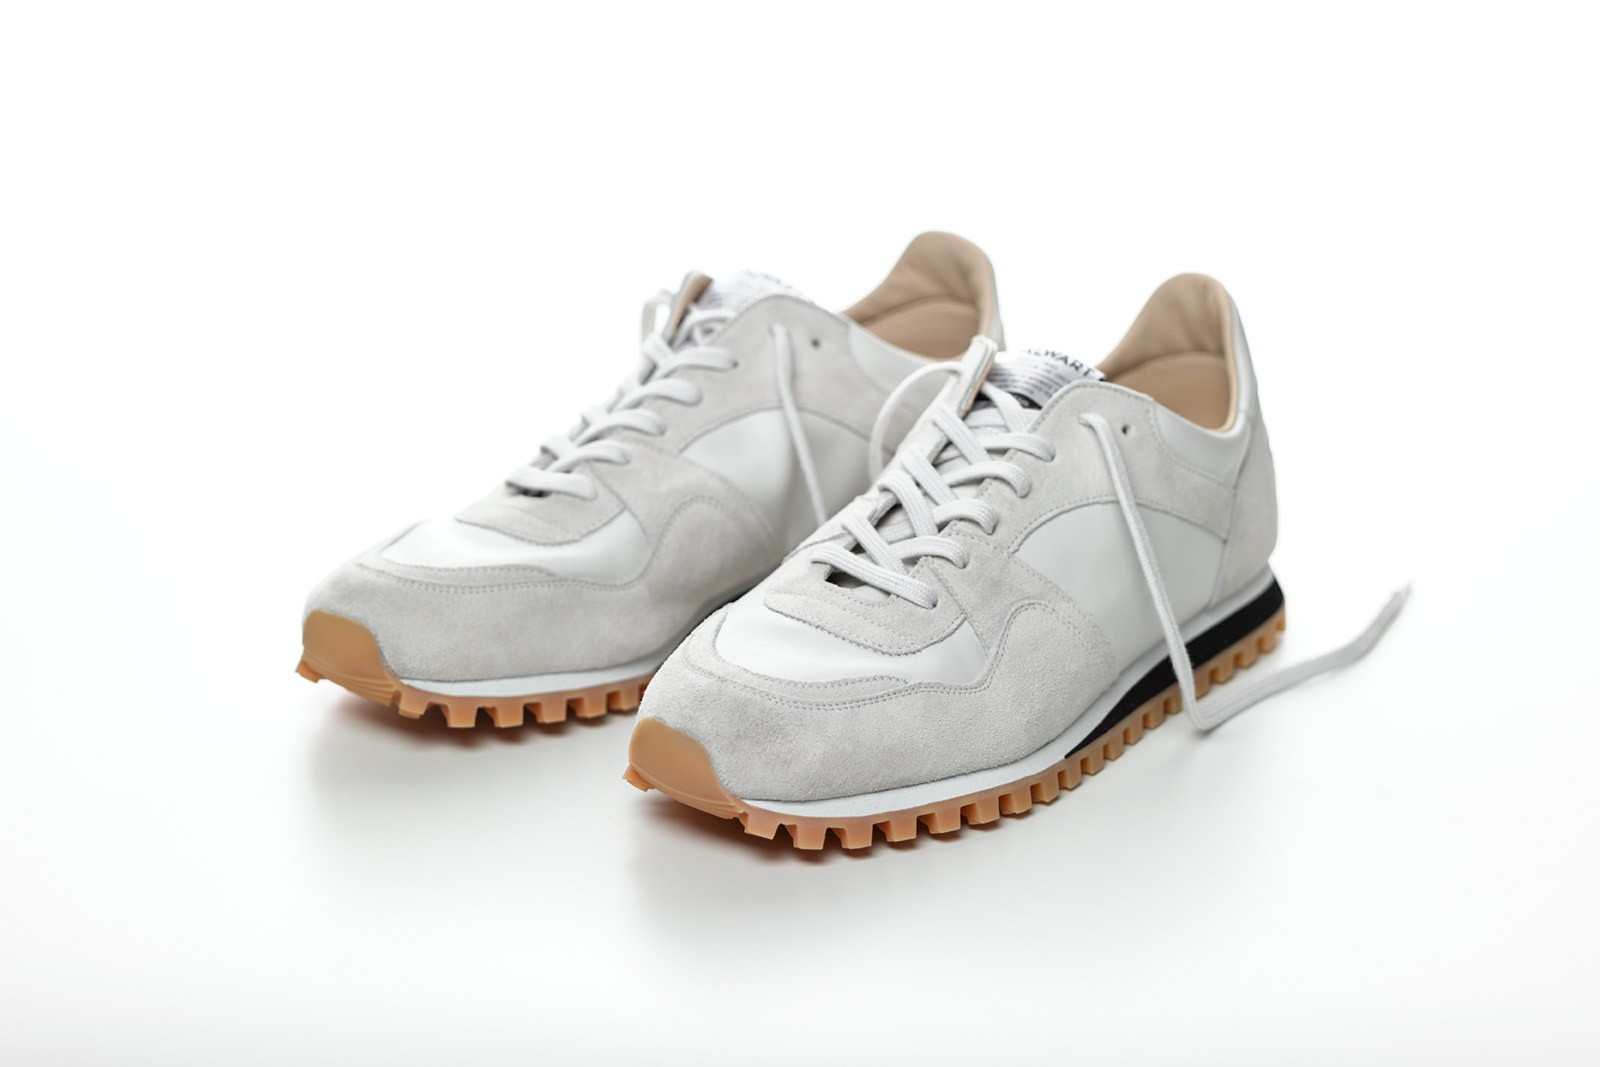 Spalwart’s white Marathon Trail trainers – one of the sneaker designs made by our five recommended ‘cool’ independent brands. Photo: Spalwart.